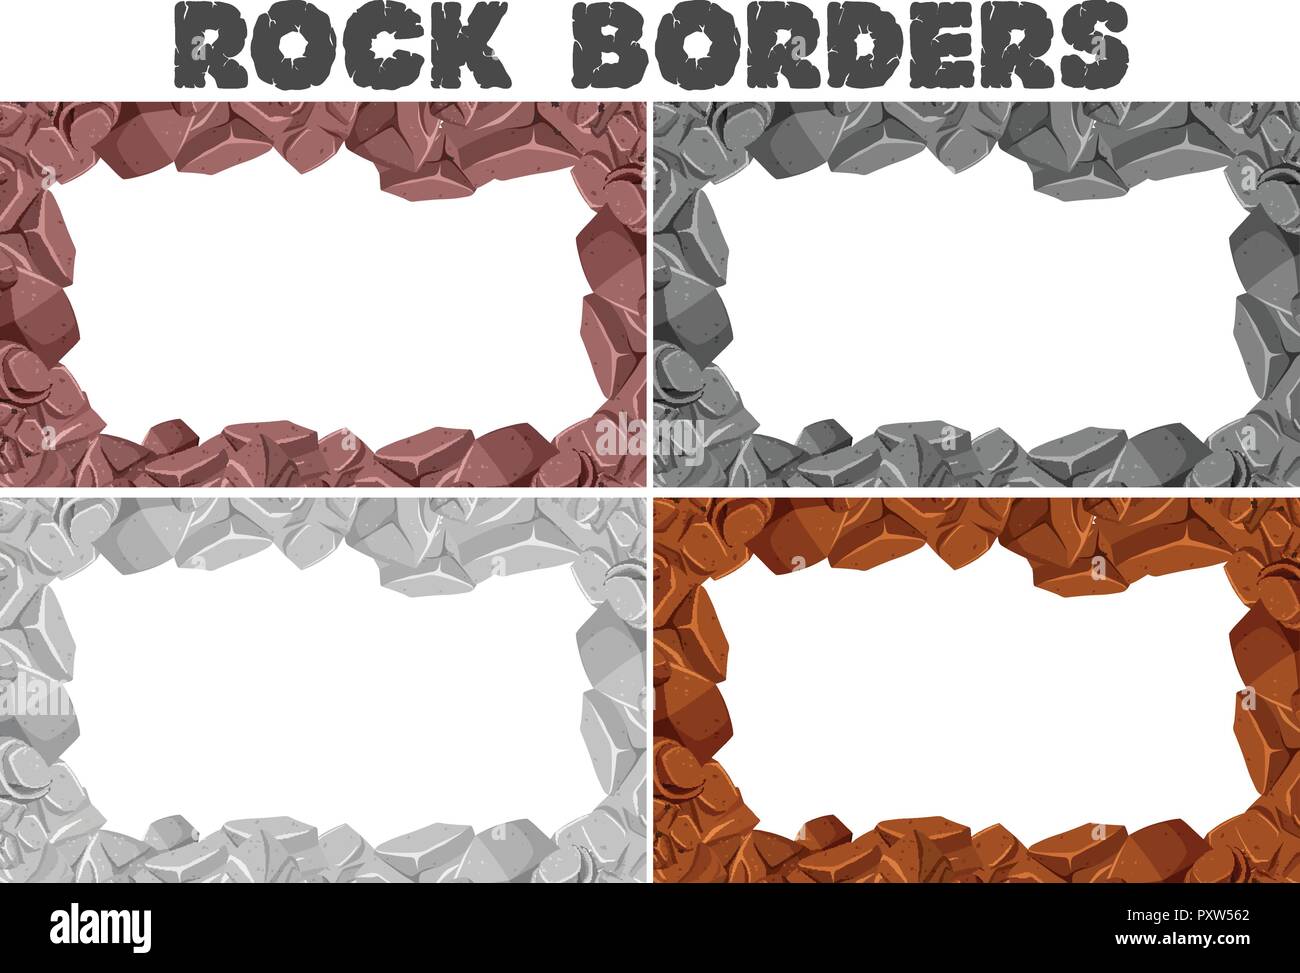 Four borders of rocks in different colors illustration Stock Vector